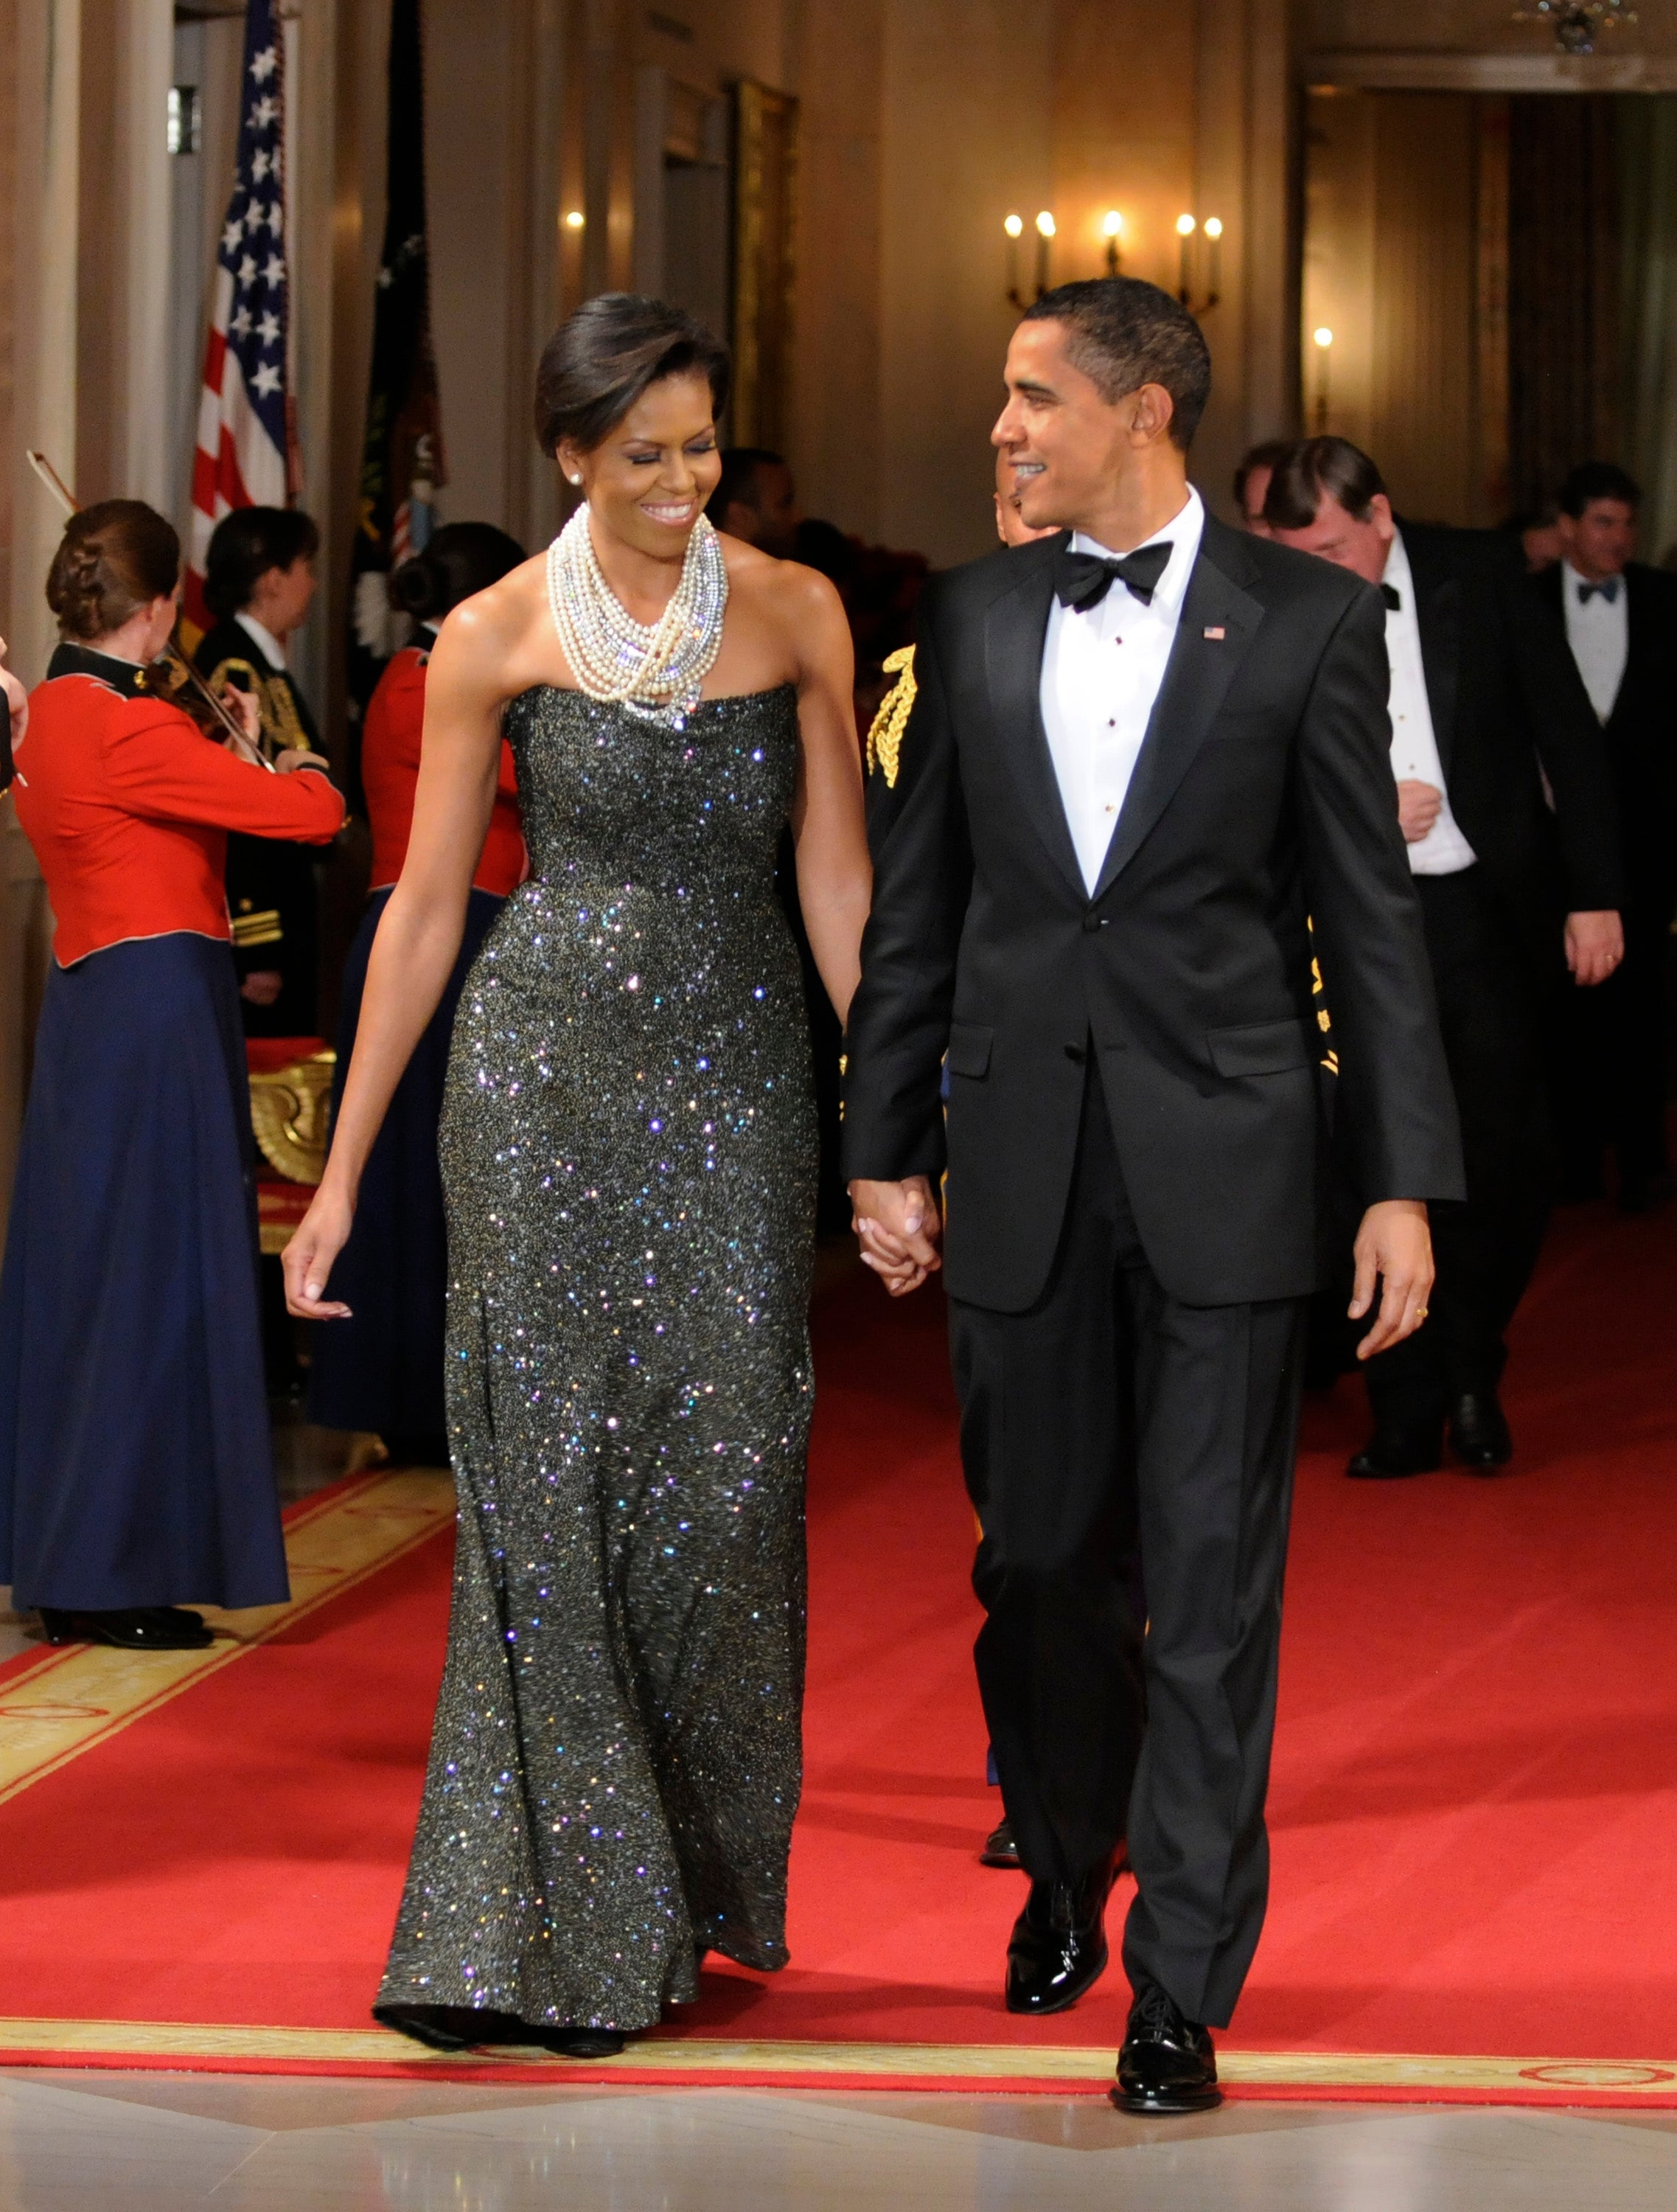 Five New Details From The Obamas’ EPIC Farewell Bash